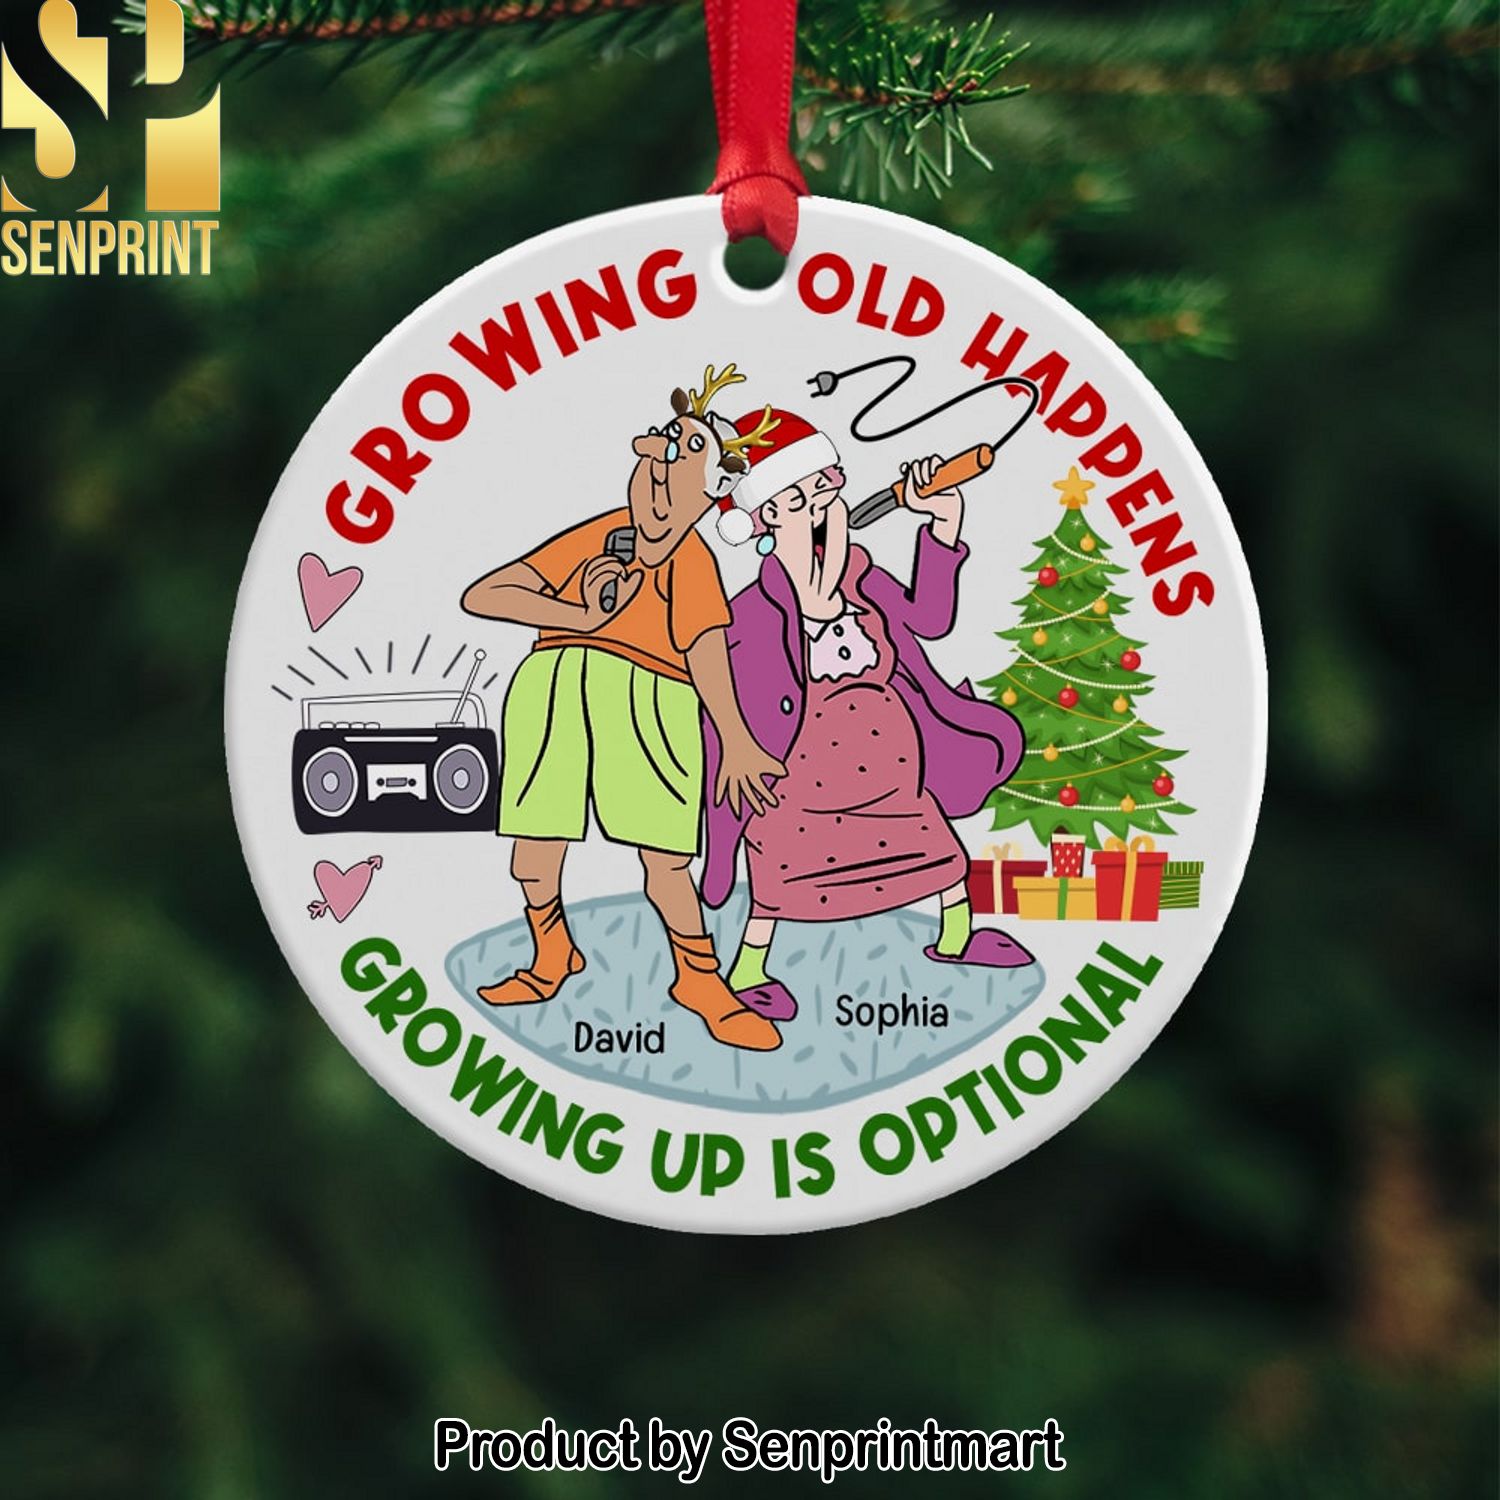 Growing Old Happens Growing Up Is Optional Personalized Ornament Ceramic Circle Ornament Gift For Christmas Couple Gift Funny Old Couple Ornament